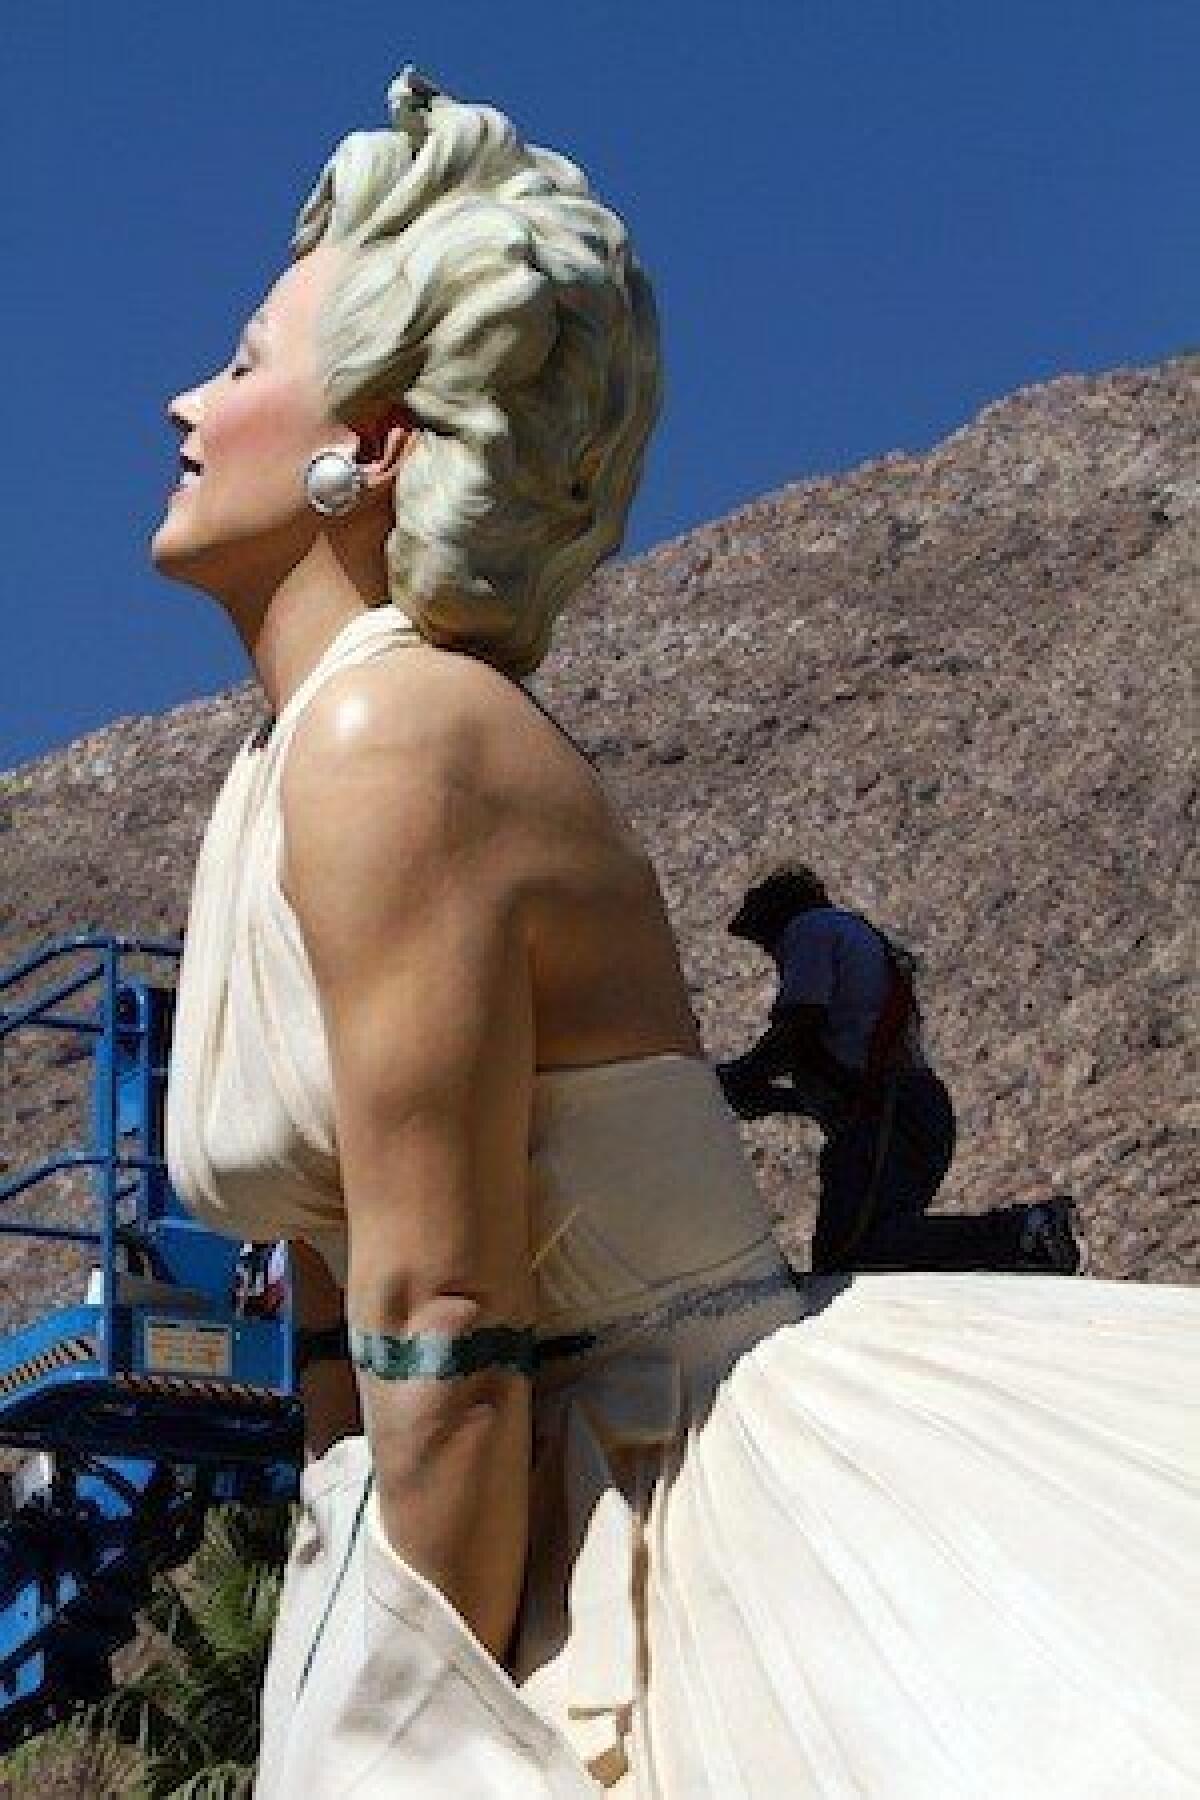 A worker puts the finishing touches on "Forever Marilyn" as the statue was installed in Palm Springs last May.